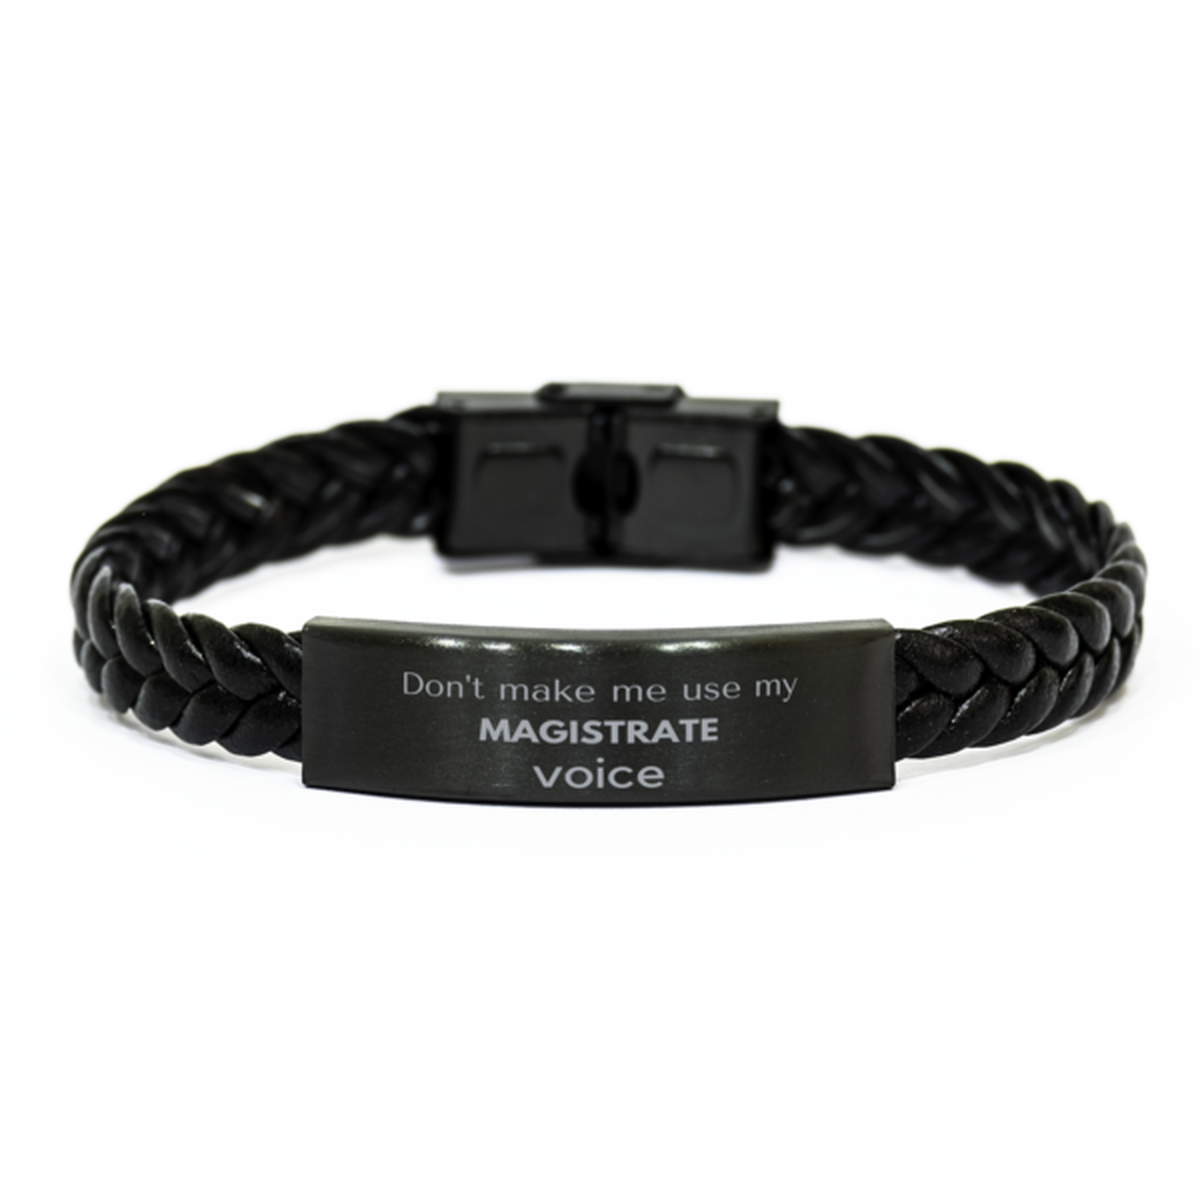 Don't make me use my Magistrate voice, Sarcasm Magistrate Gifts, Christmas Magistrate Braided Leather Bracelet Birthday Unique Gifts For Magistrate Coworkers, Men, Women, Colleague, Friends